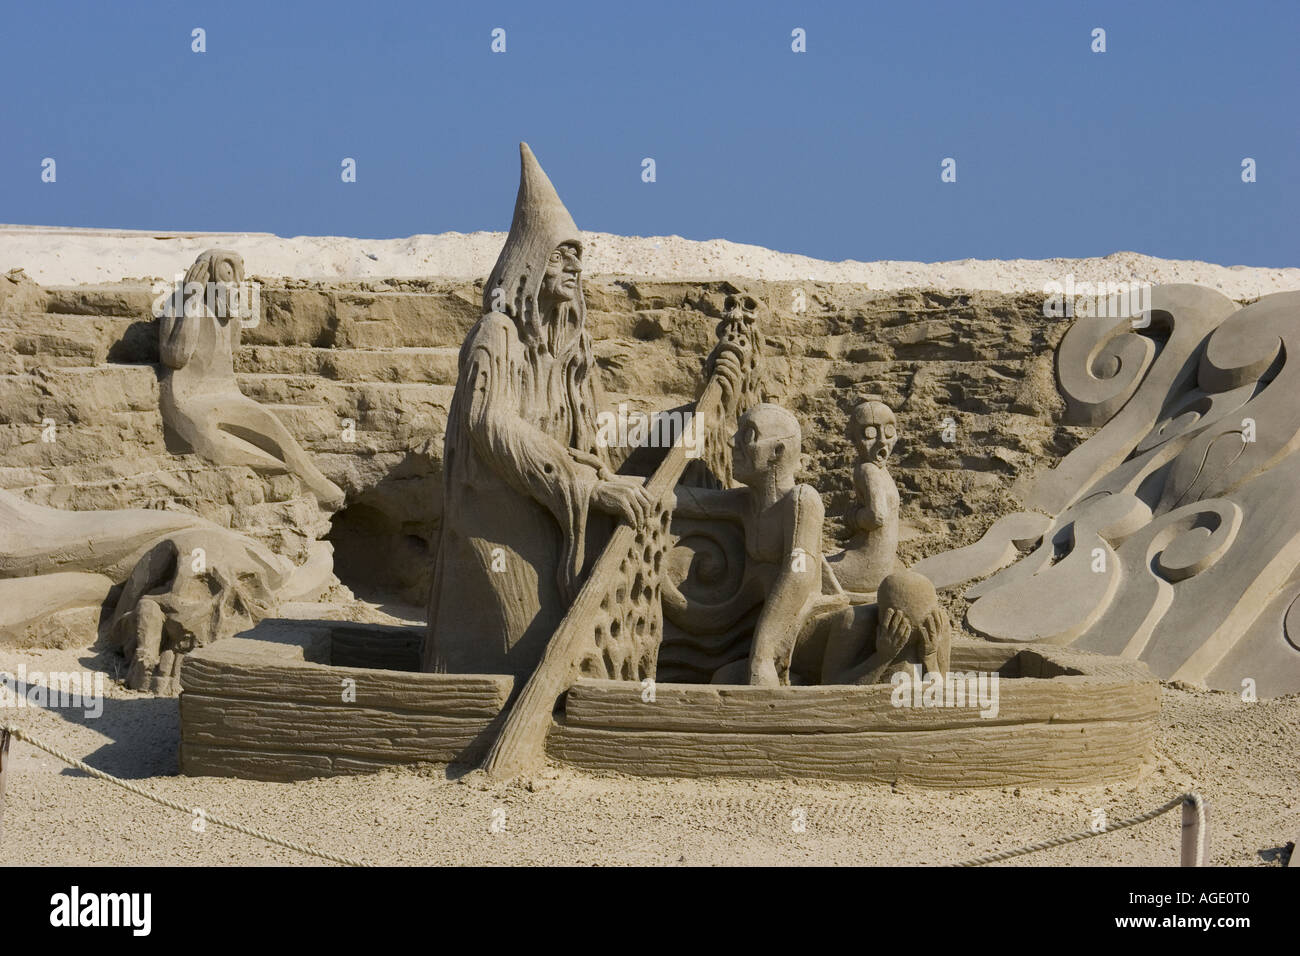 Sand sculpture of Charon, the ferryman of the dead in ancient Greek mythology. Stock Photo